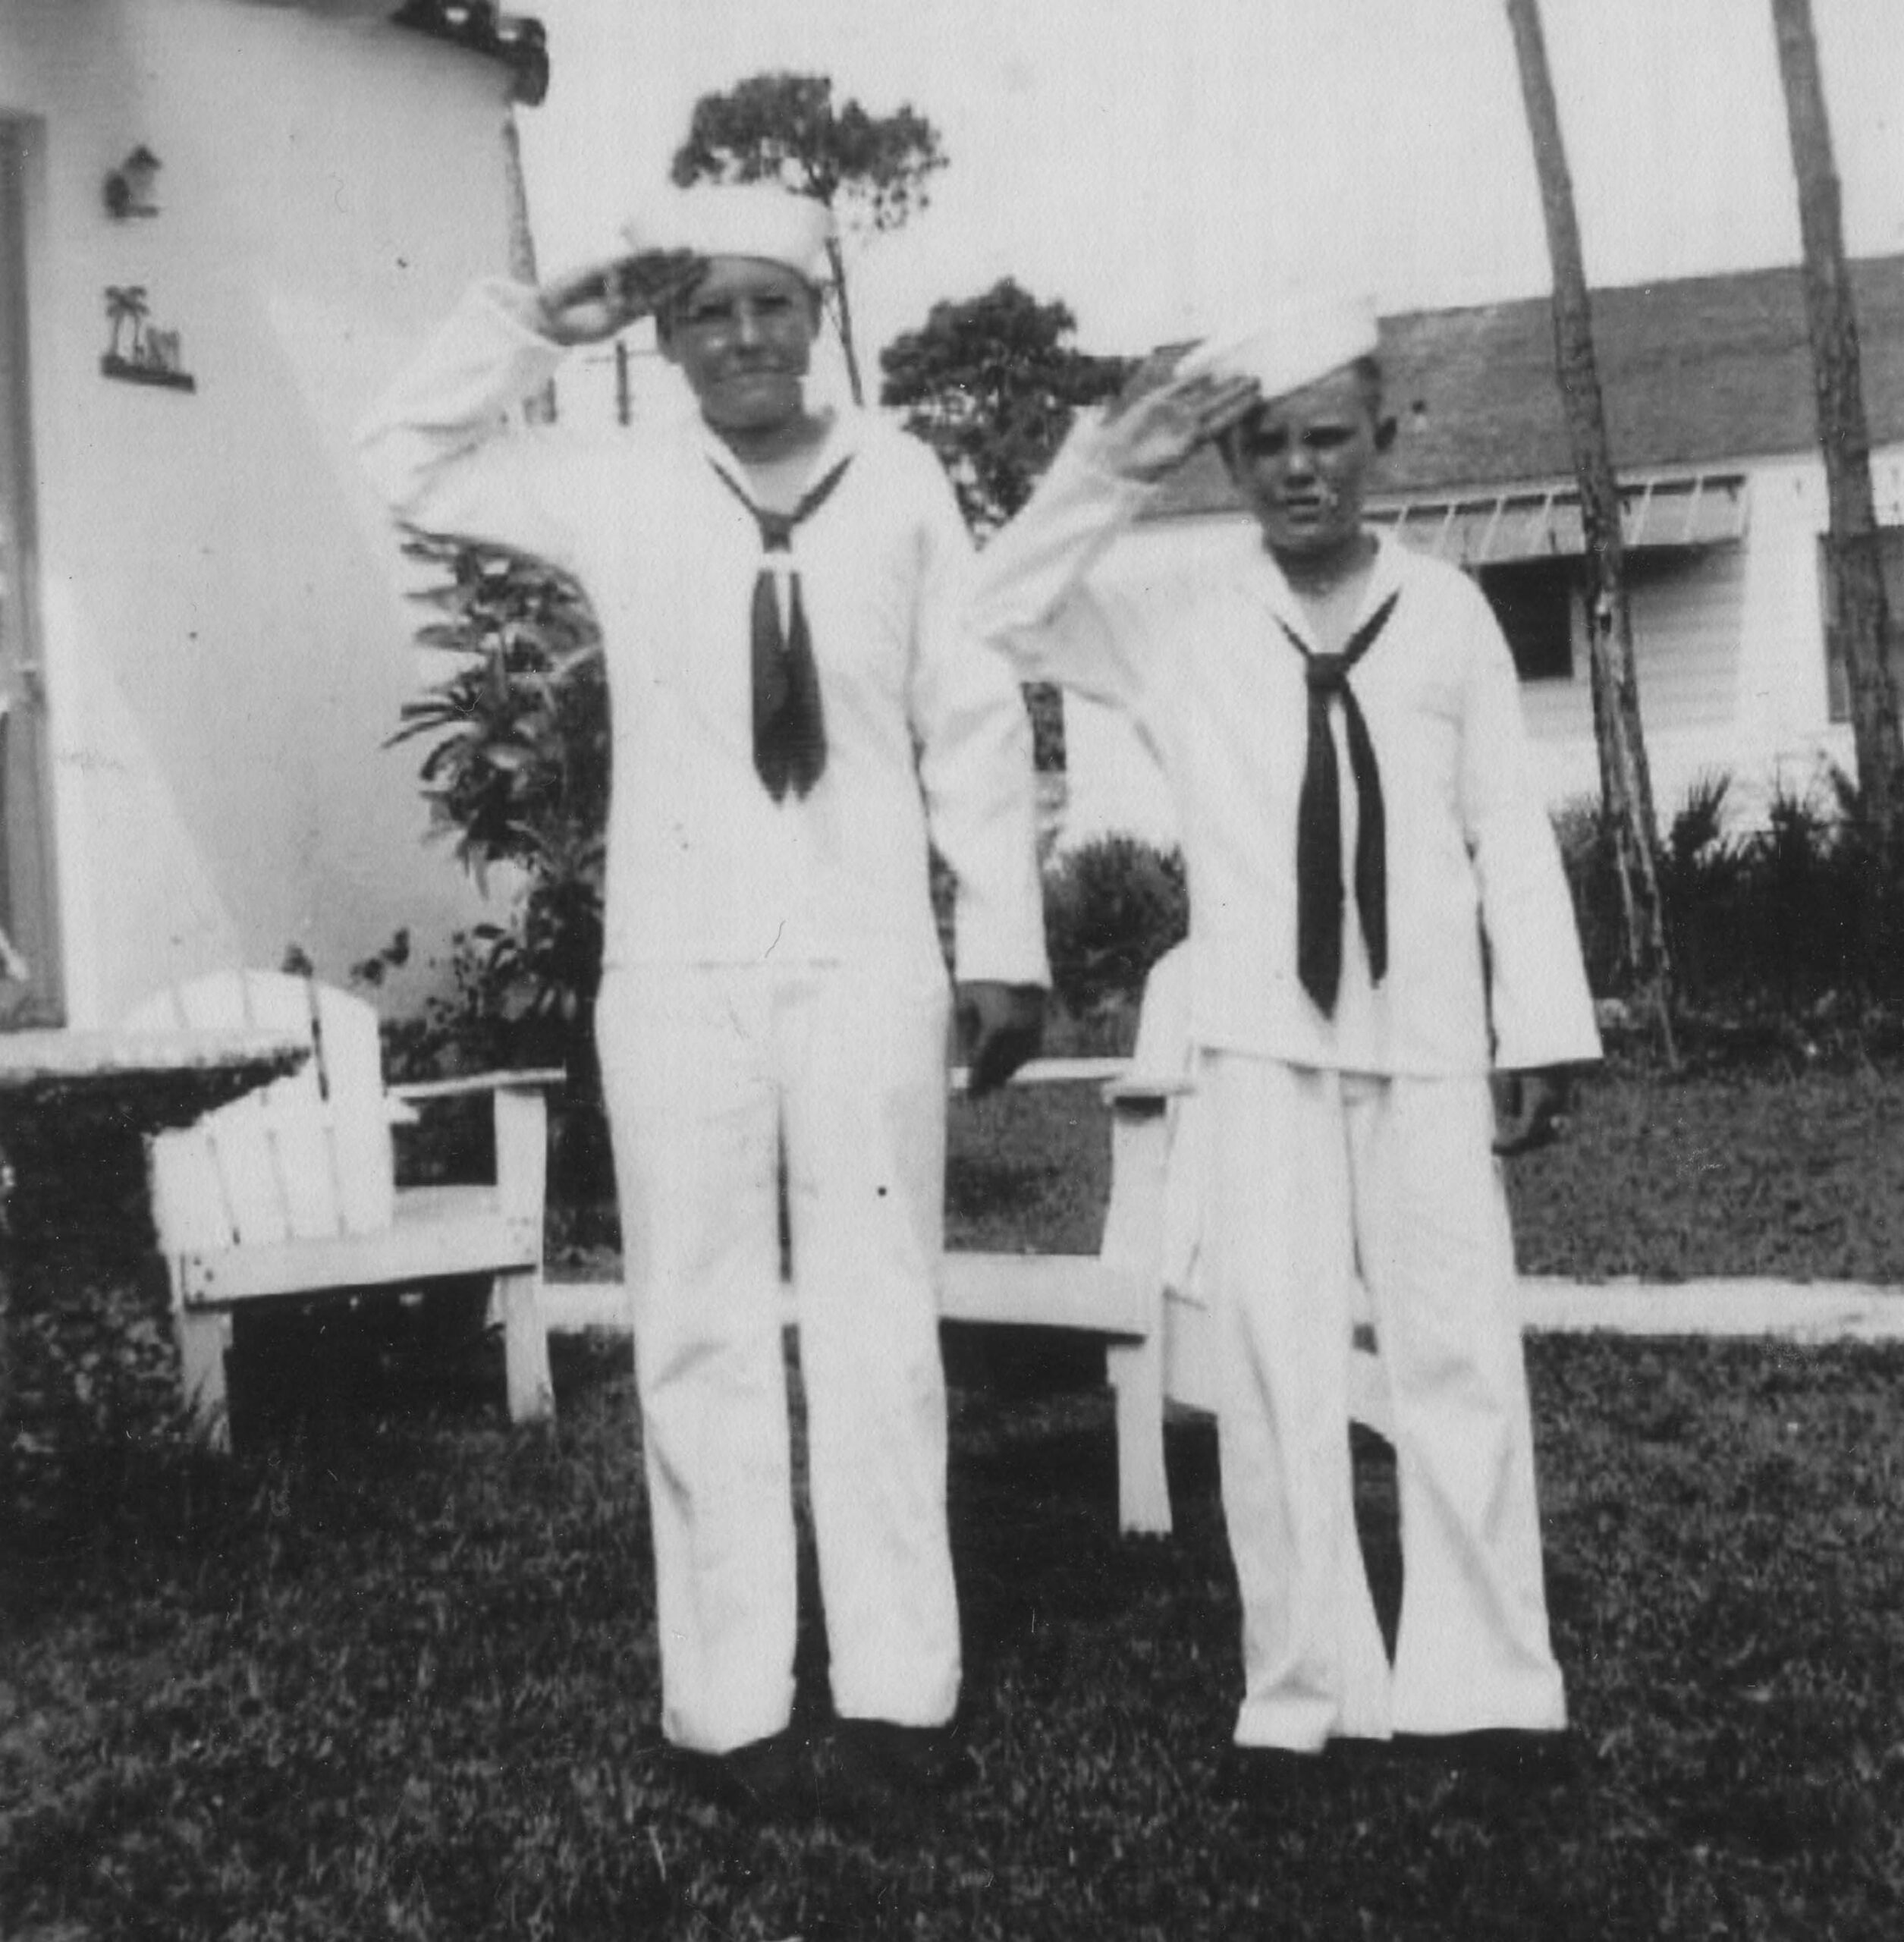 A black and white photo of Al Borden (Left) and Jerry Capley (right) dressed in Navy uniforms in 1942. The two are standing in a yard in a salute.